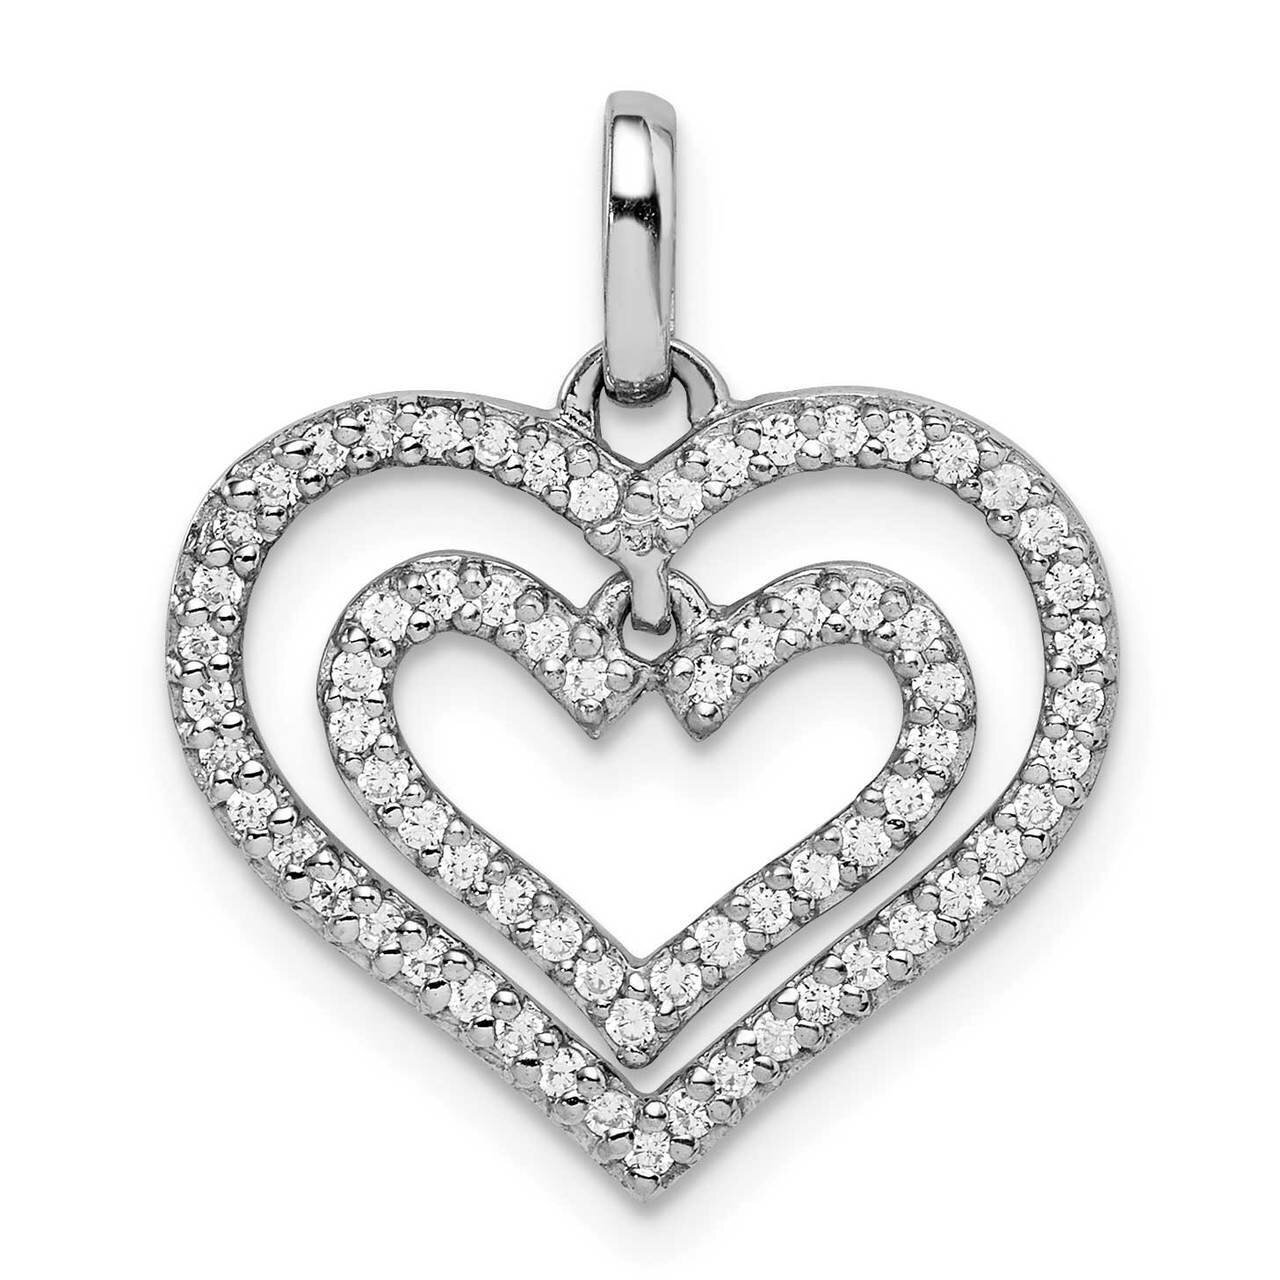 Double Heart Pendant Sterling Silver Rhodium-plated CZ Diamond QC9476